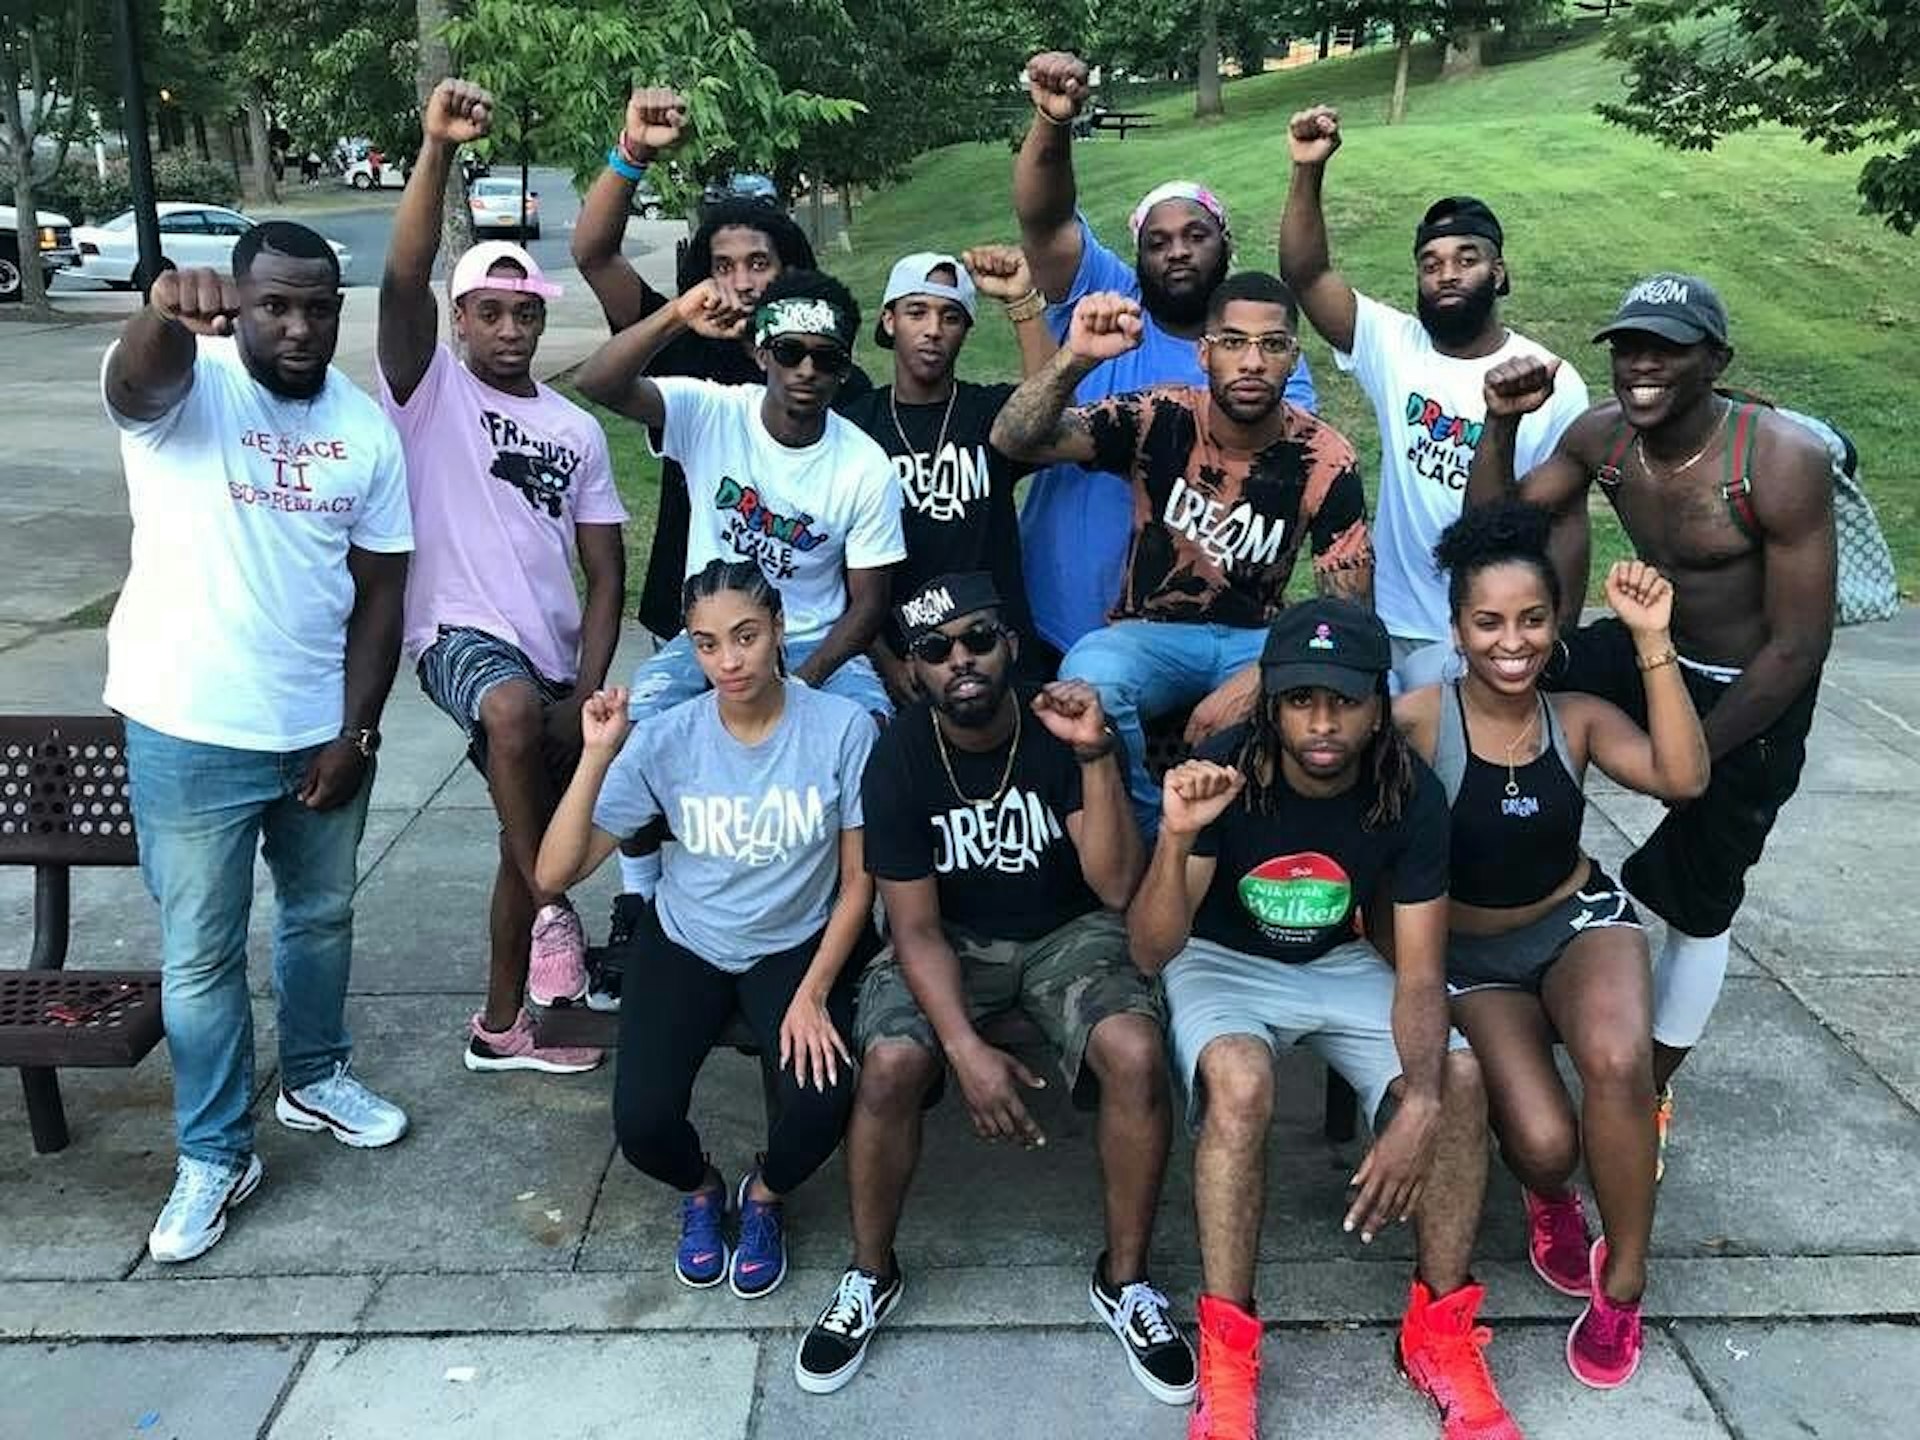 How streetwear is uniting the community in Charlottesville